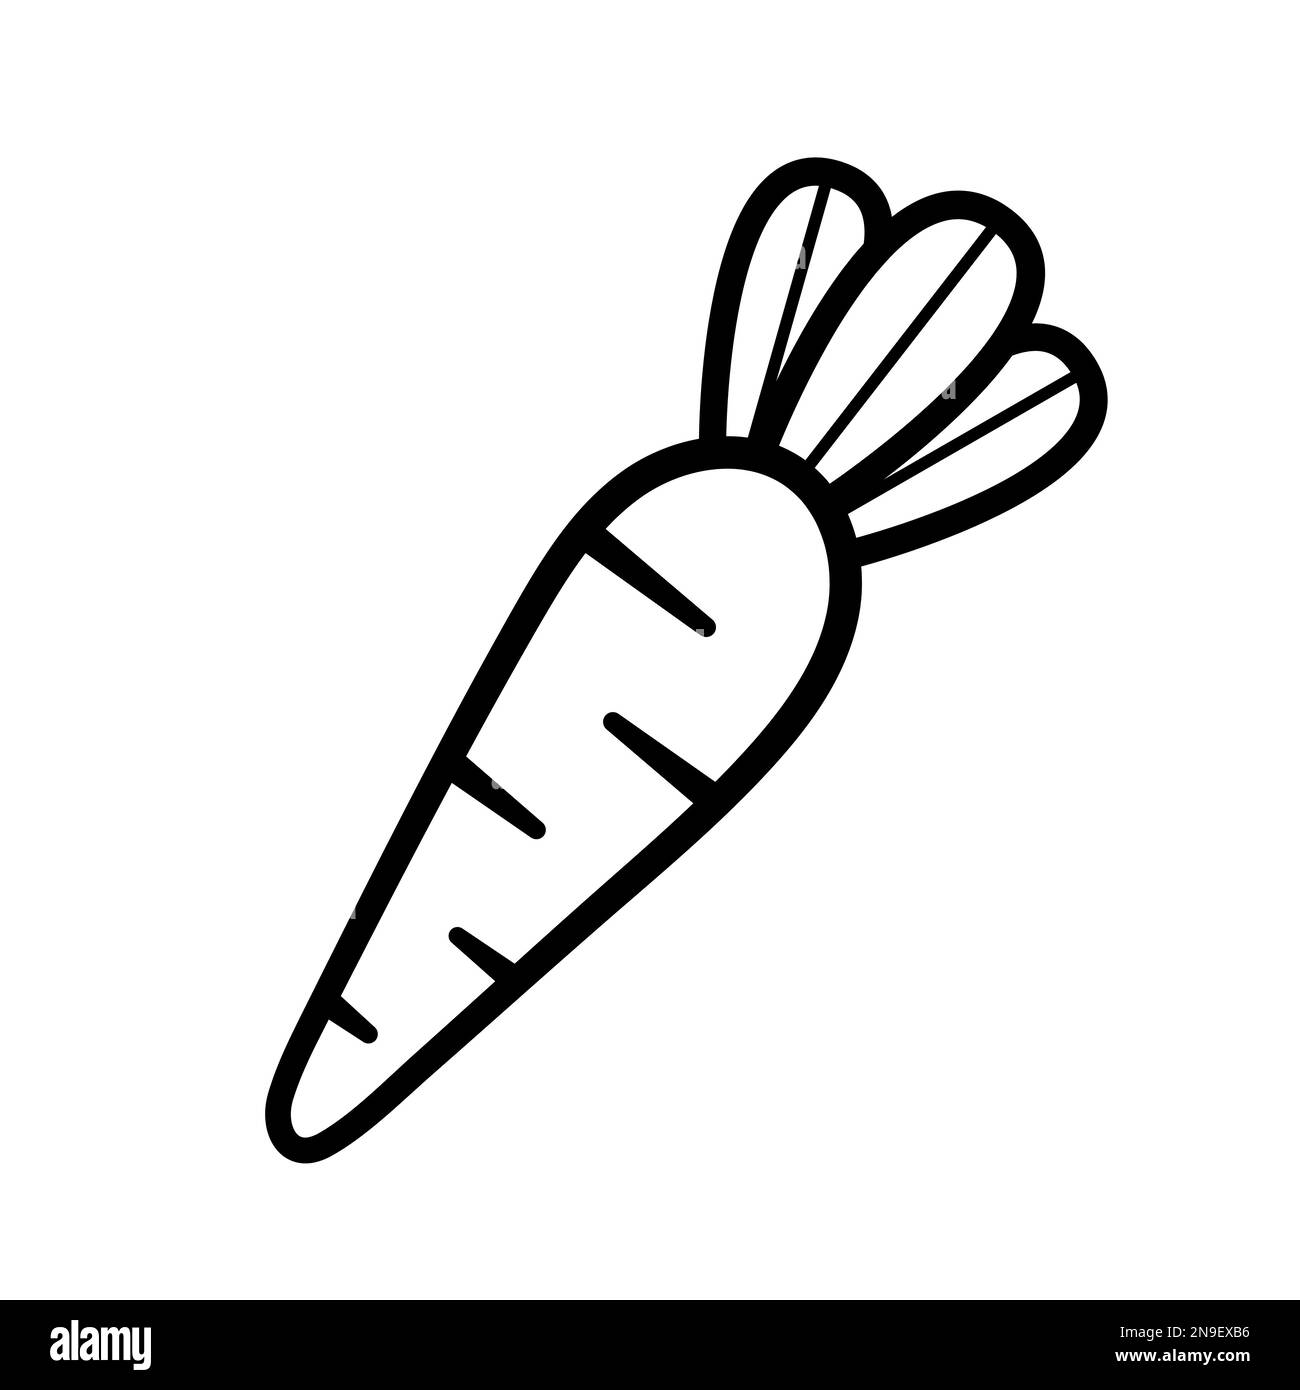 Carrot. Hand drawn icon in sketch doodle style. Isolated vector illustration. Stock Vector